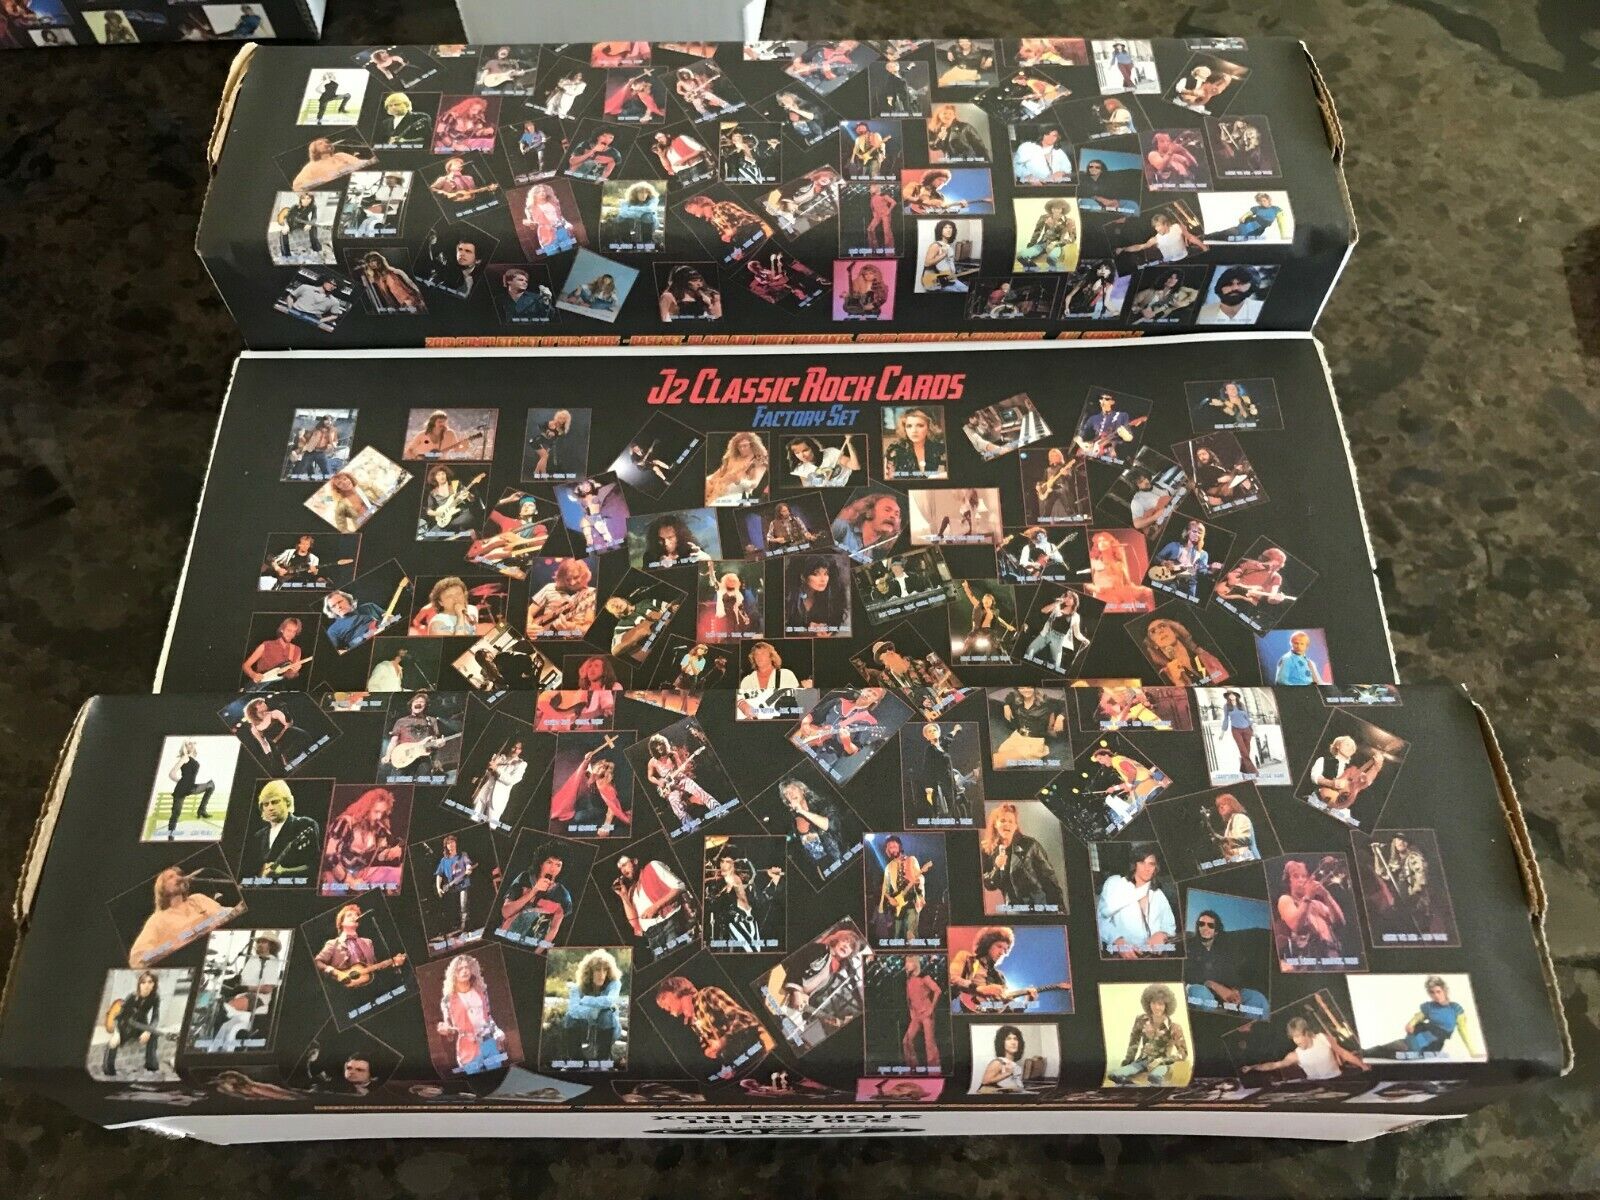 J2 Classic Rock Cards - 2019/20 Factory Set of 1010 cards (bonus and variants)